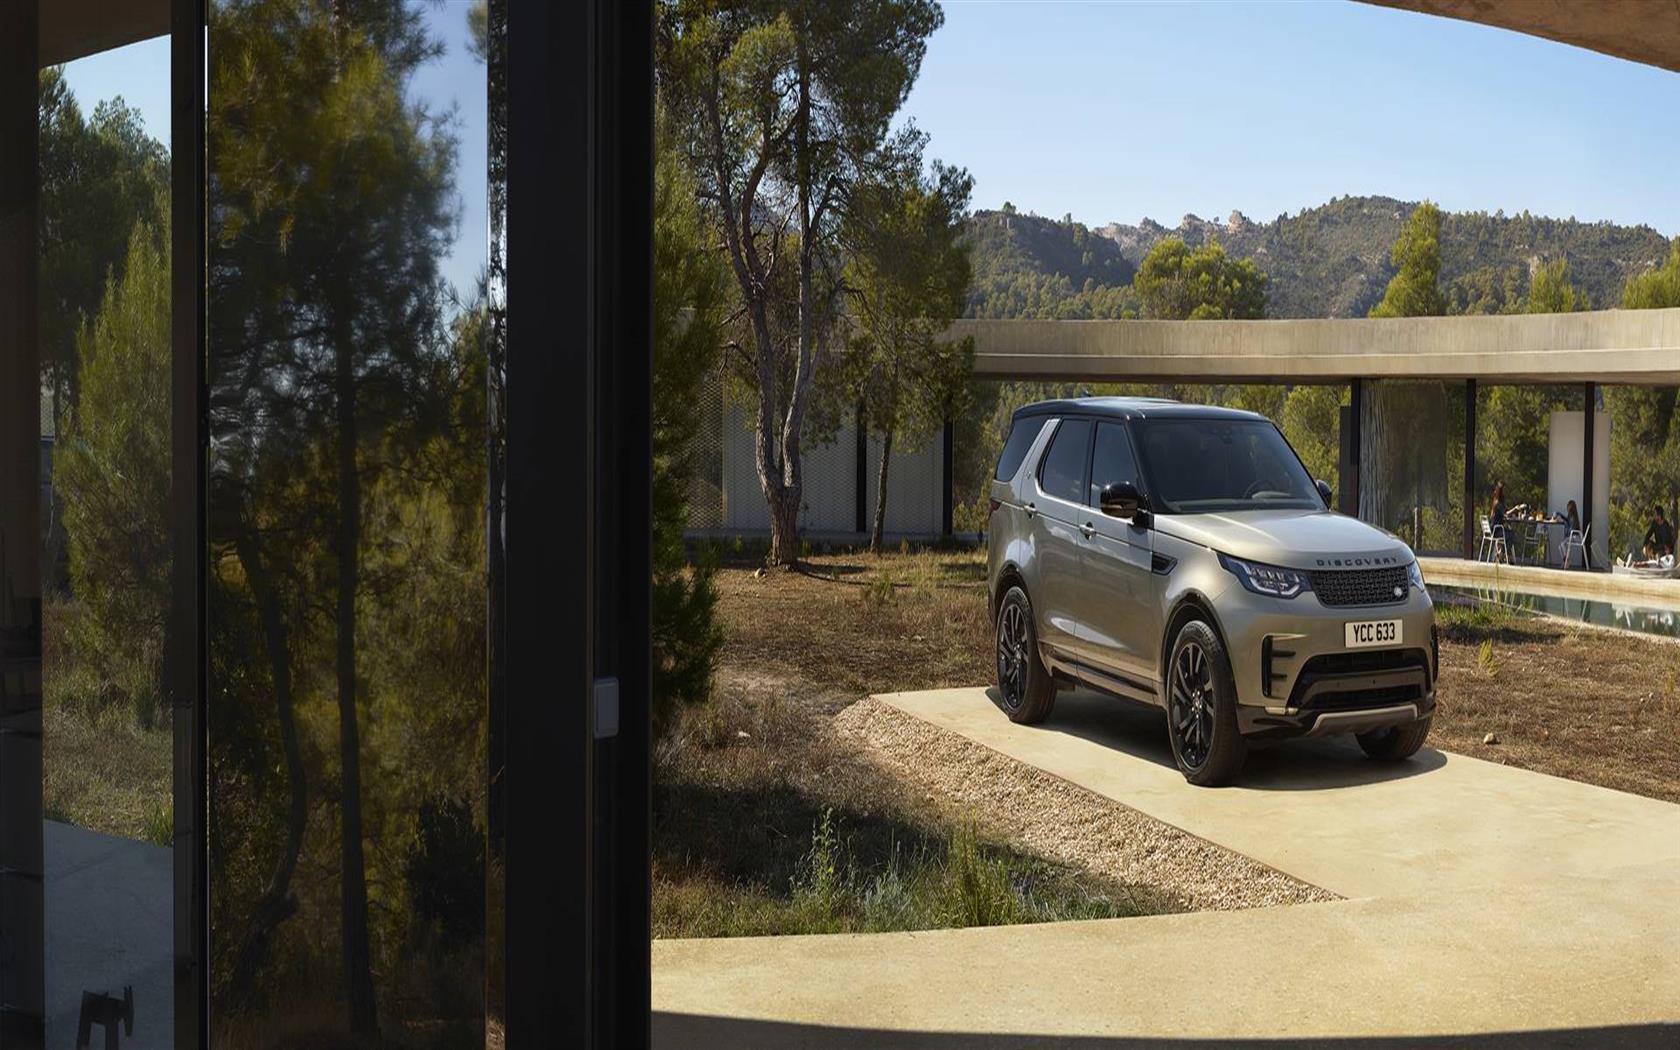 2019 Land Rover Discovery Landmark Edition